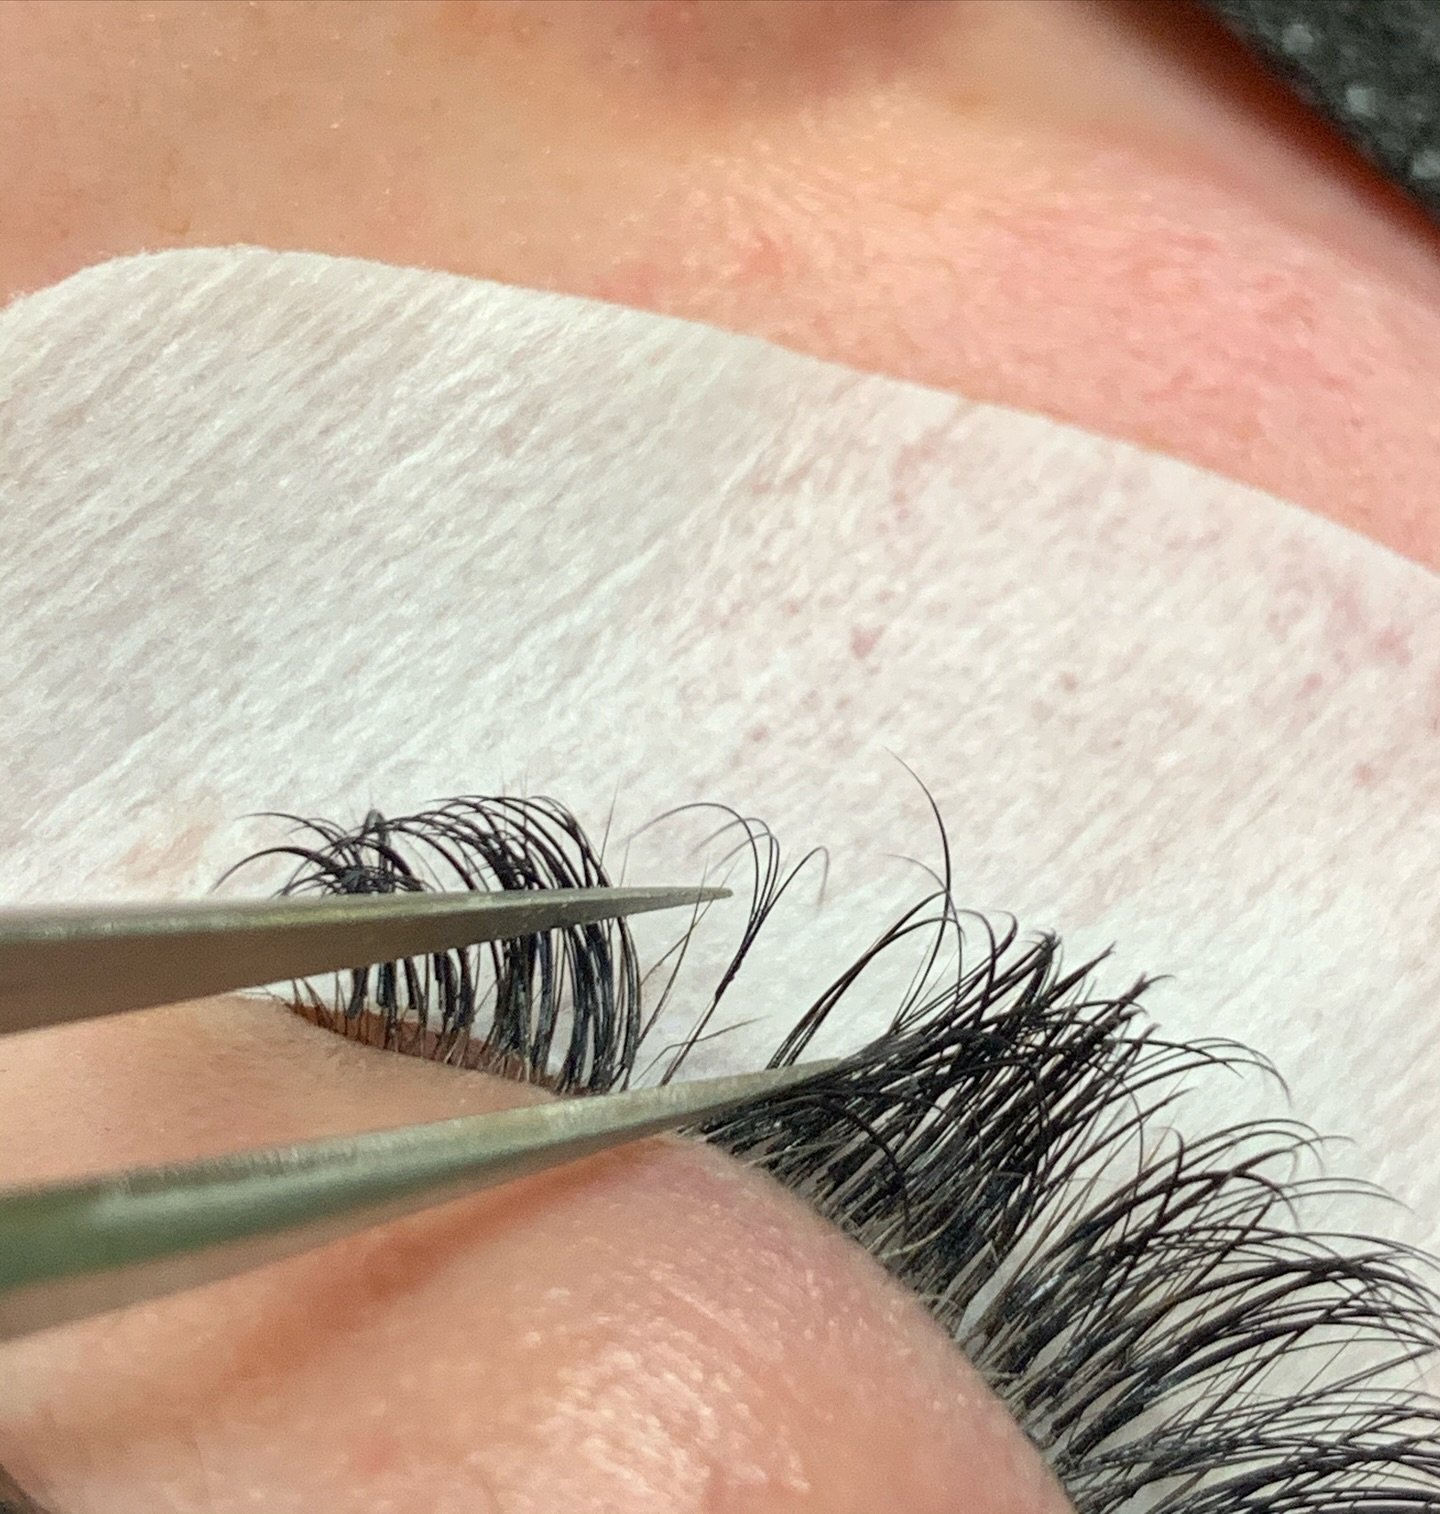 This happy lash extension is ready to be peeled off the natural lash! This fan is squeaky clean and out grown meaning the client has been washing and brushing properly. During your 2-3 week fills, this is where I would go in to peel off any outgrown 